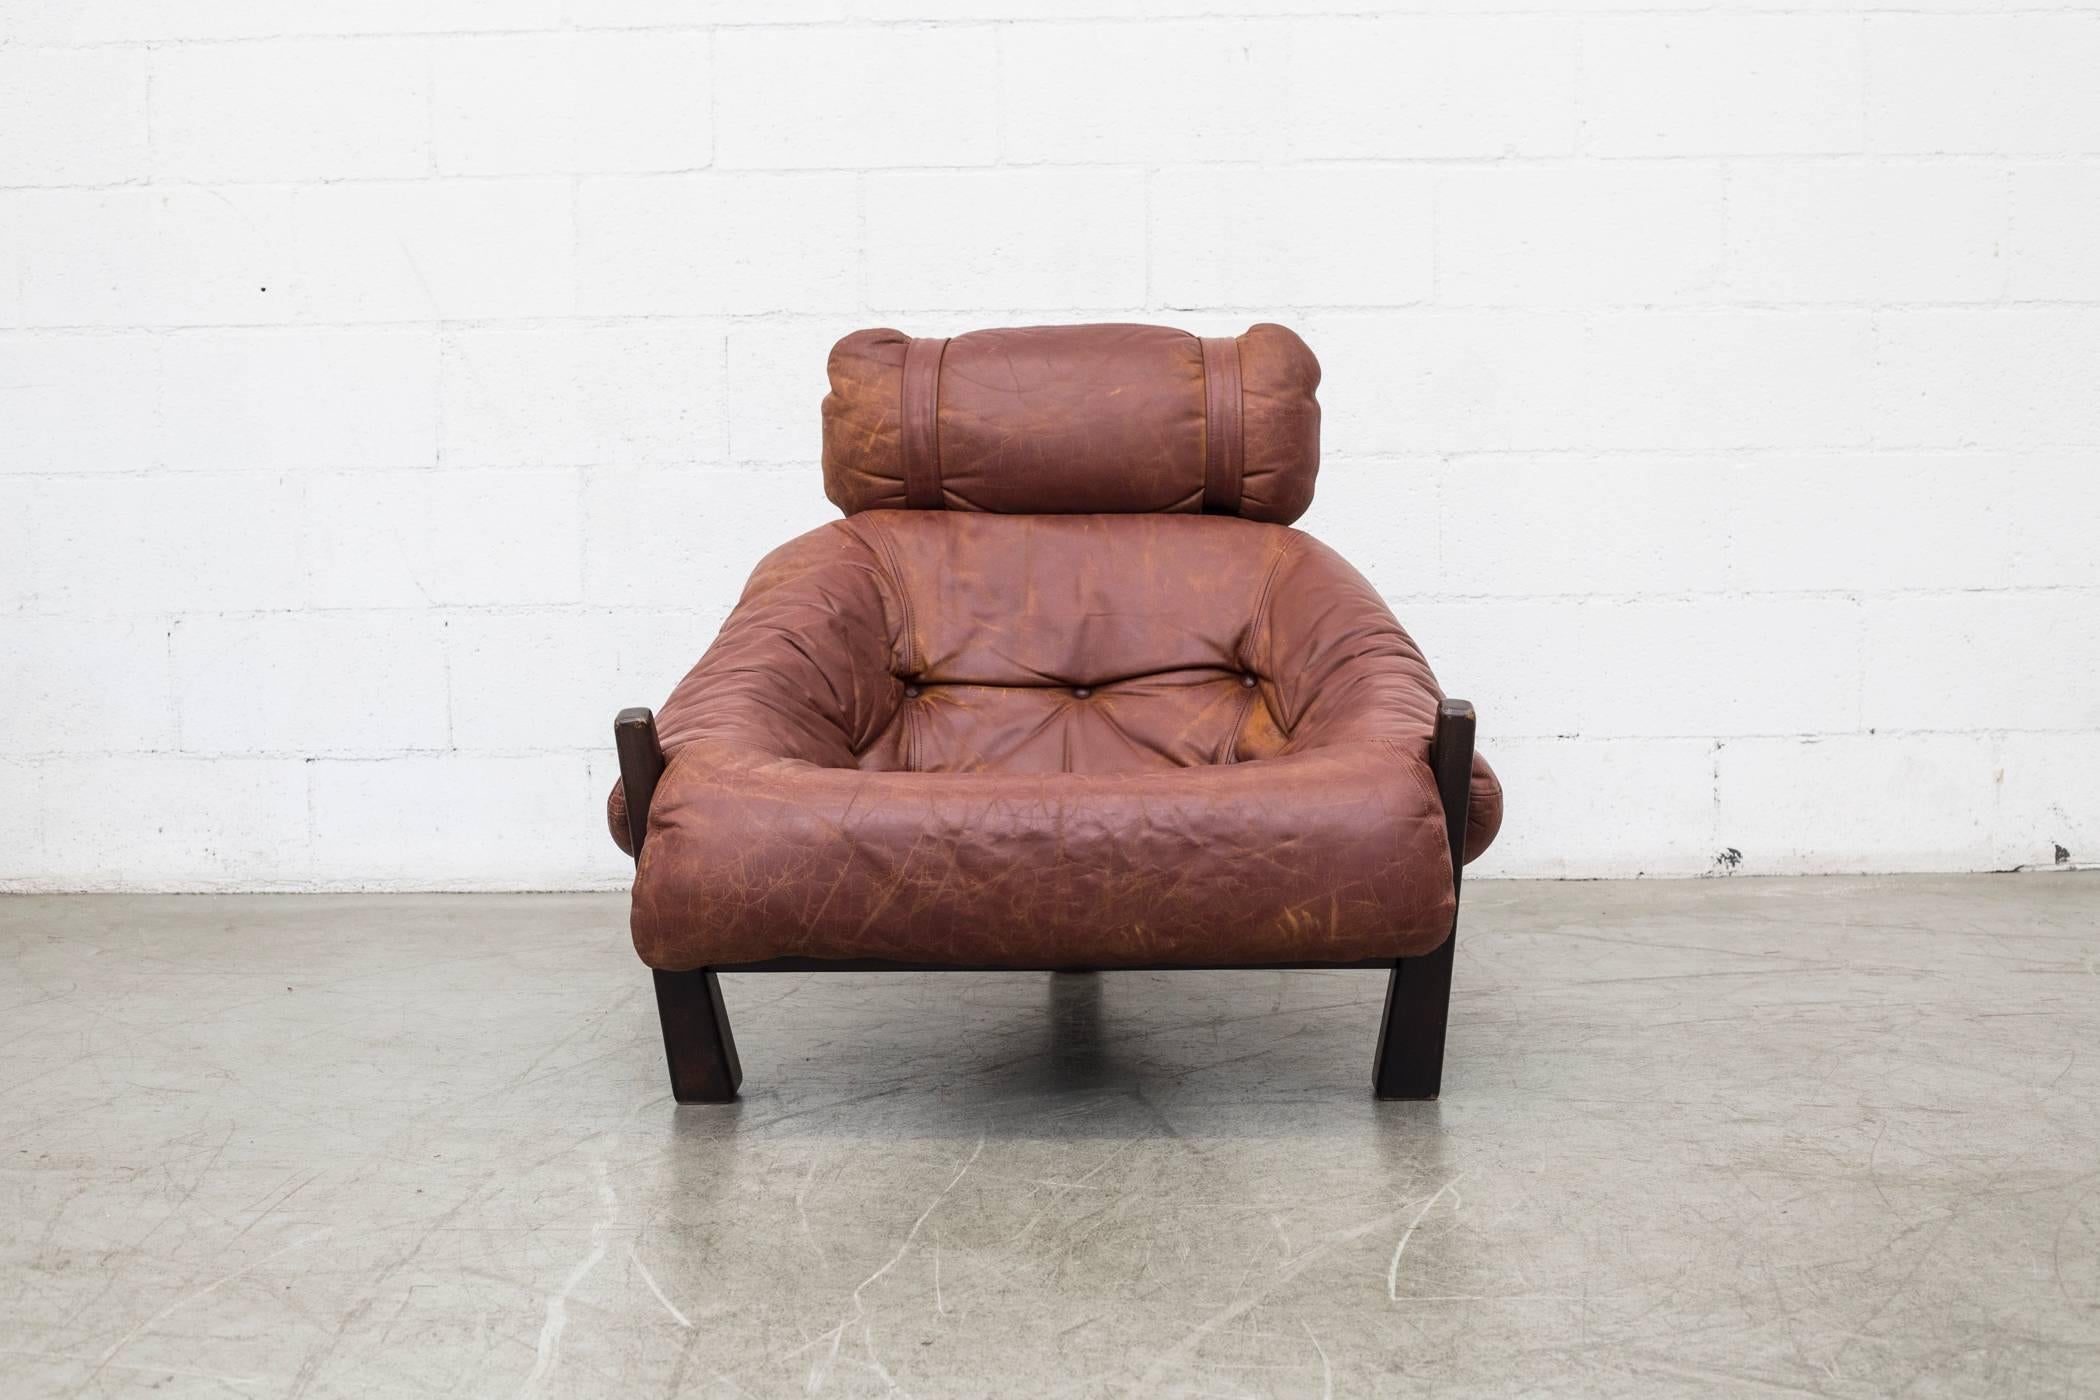 Gerard Van Den Berg lounge chair for Montis, 1970-1972. Tobacco colored leather with visible patina and heavy tripod base frame. Smart tension strap support system. Original condition.